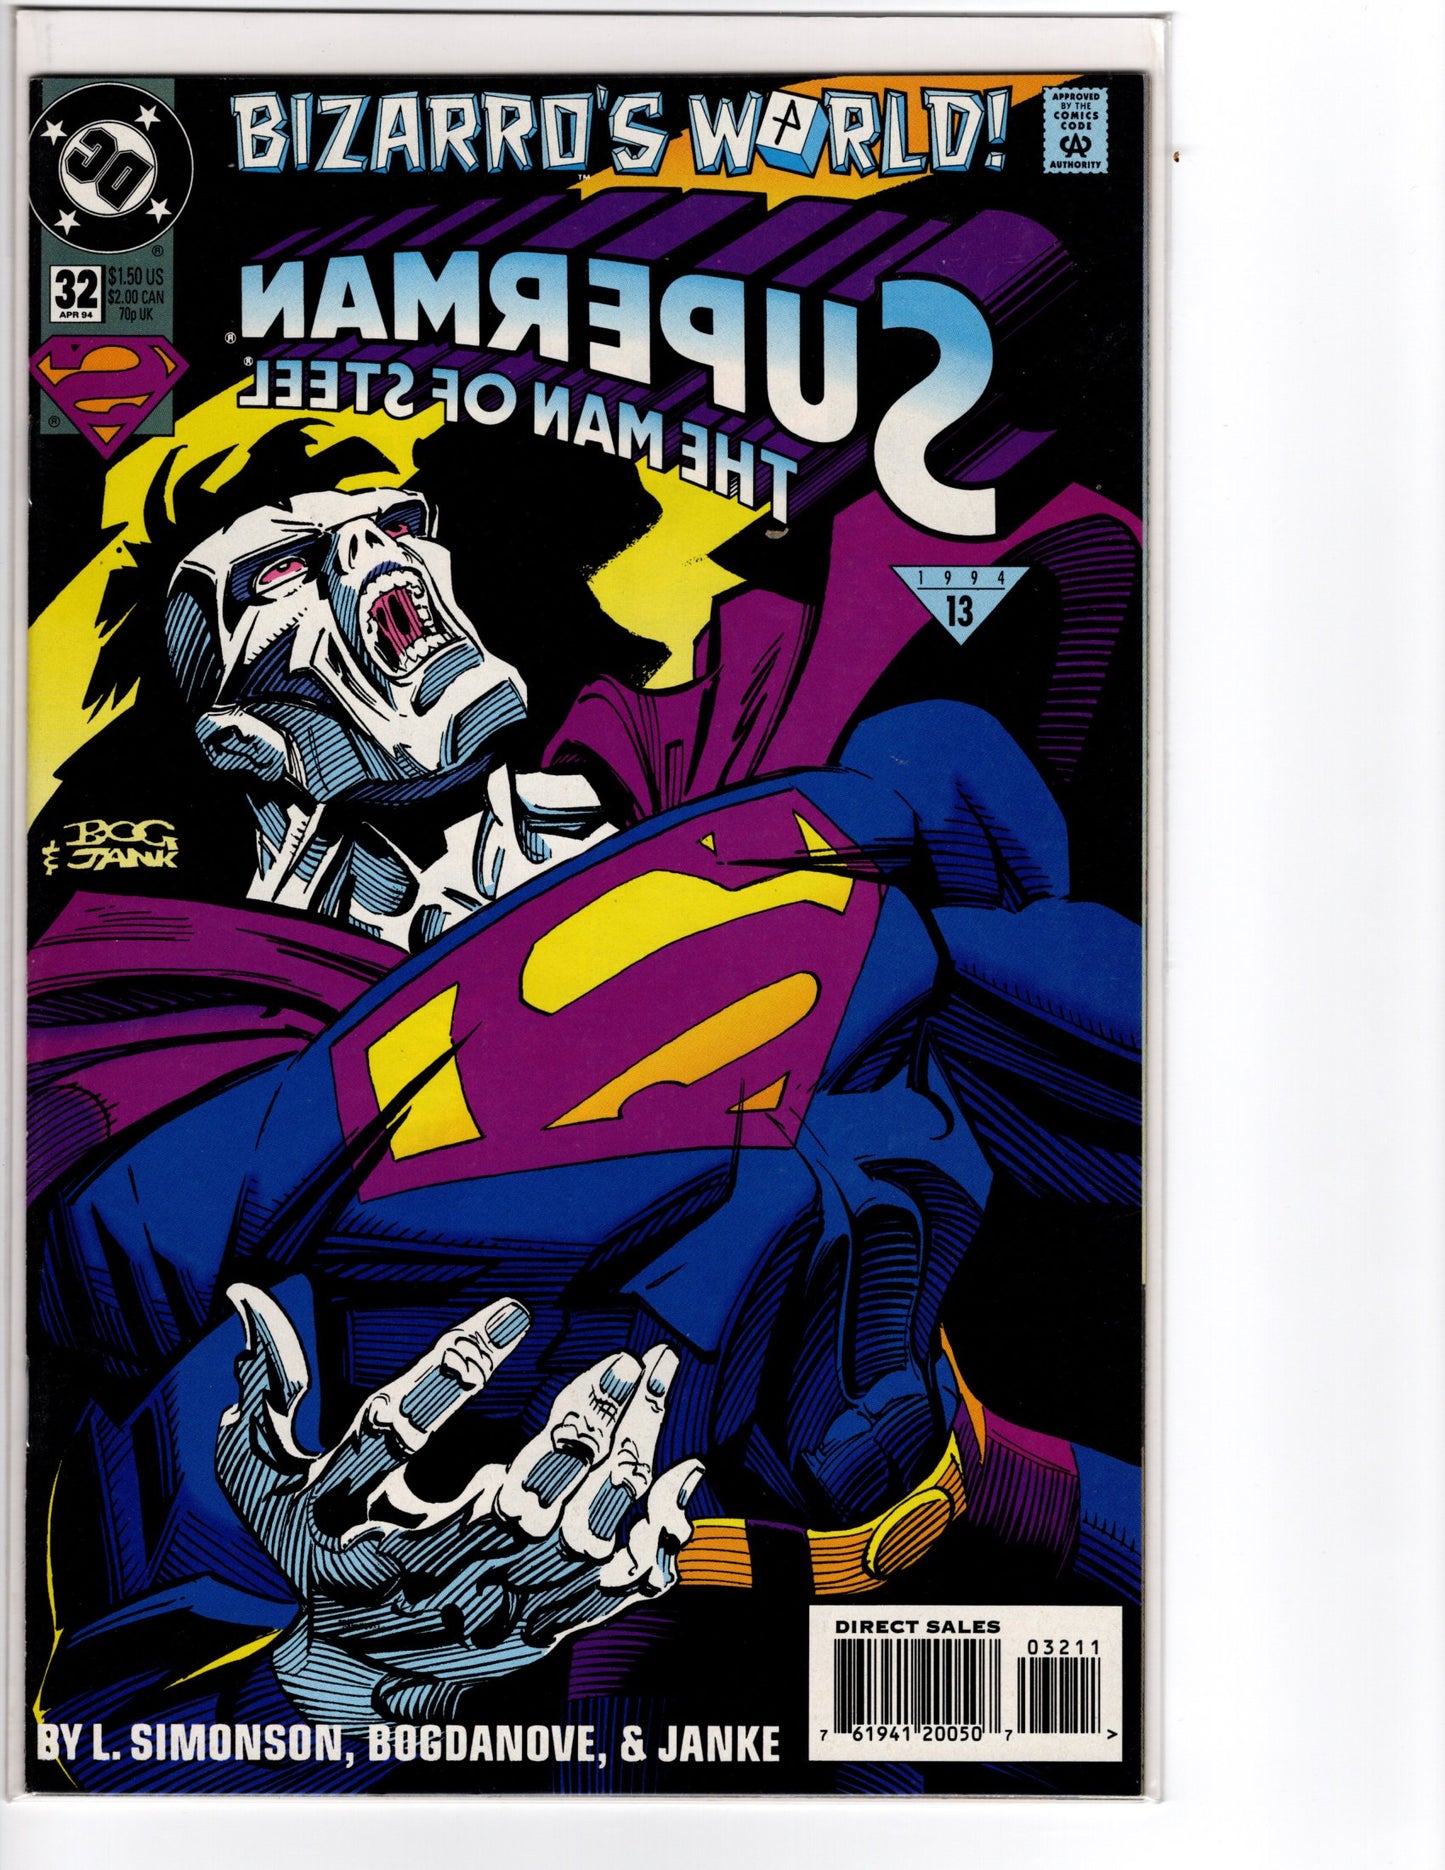 Superman - The Man of Steel No. 32